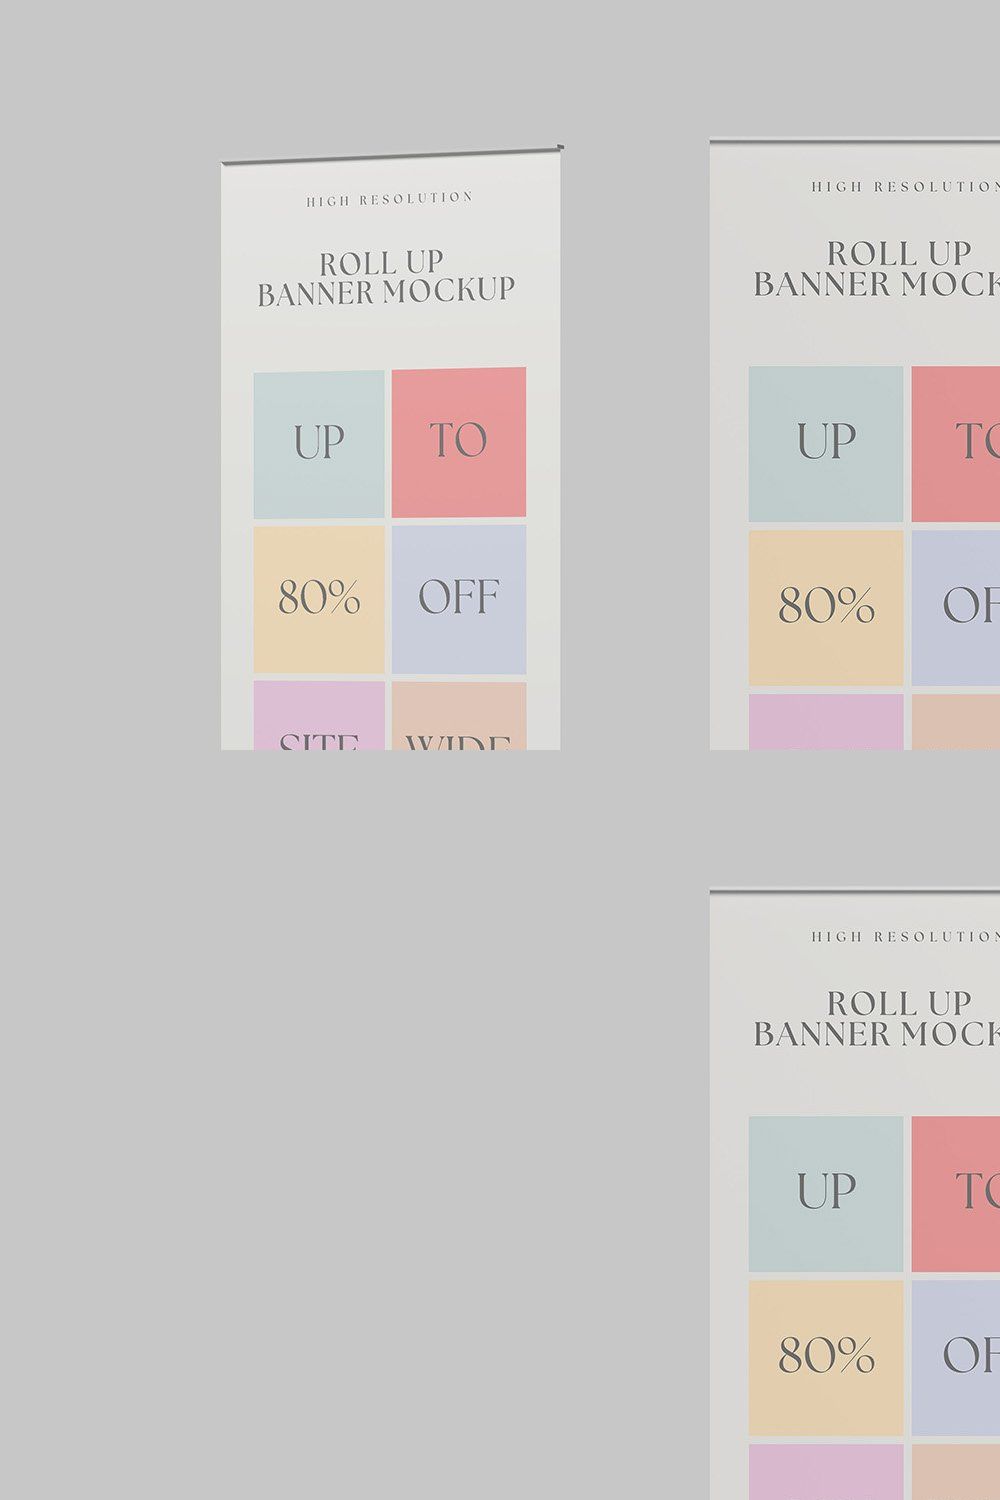 Rollup Banner Mockup pinterest preview image.